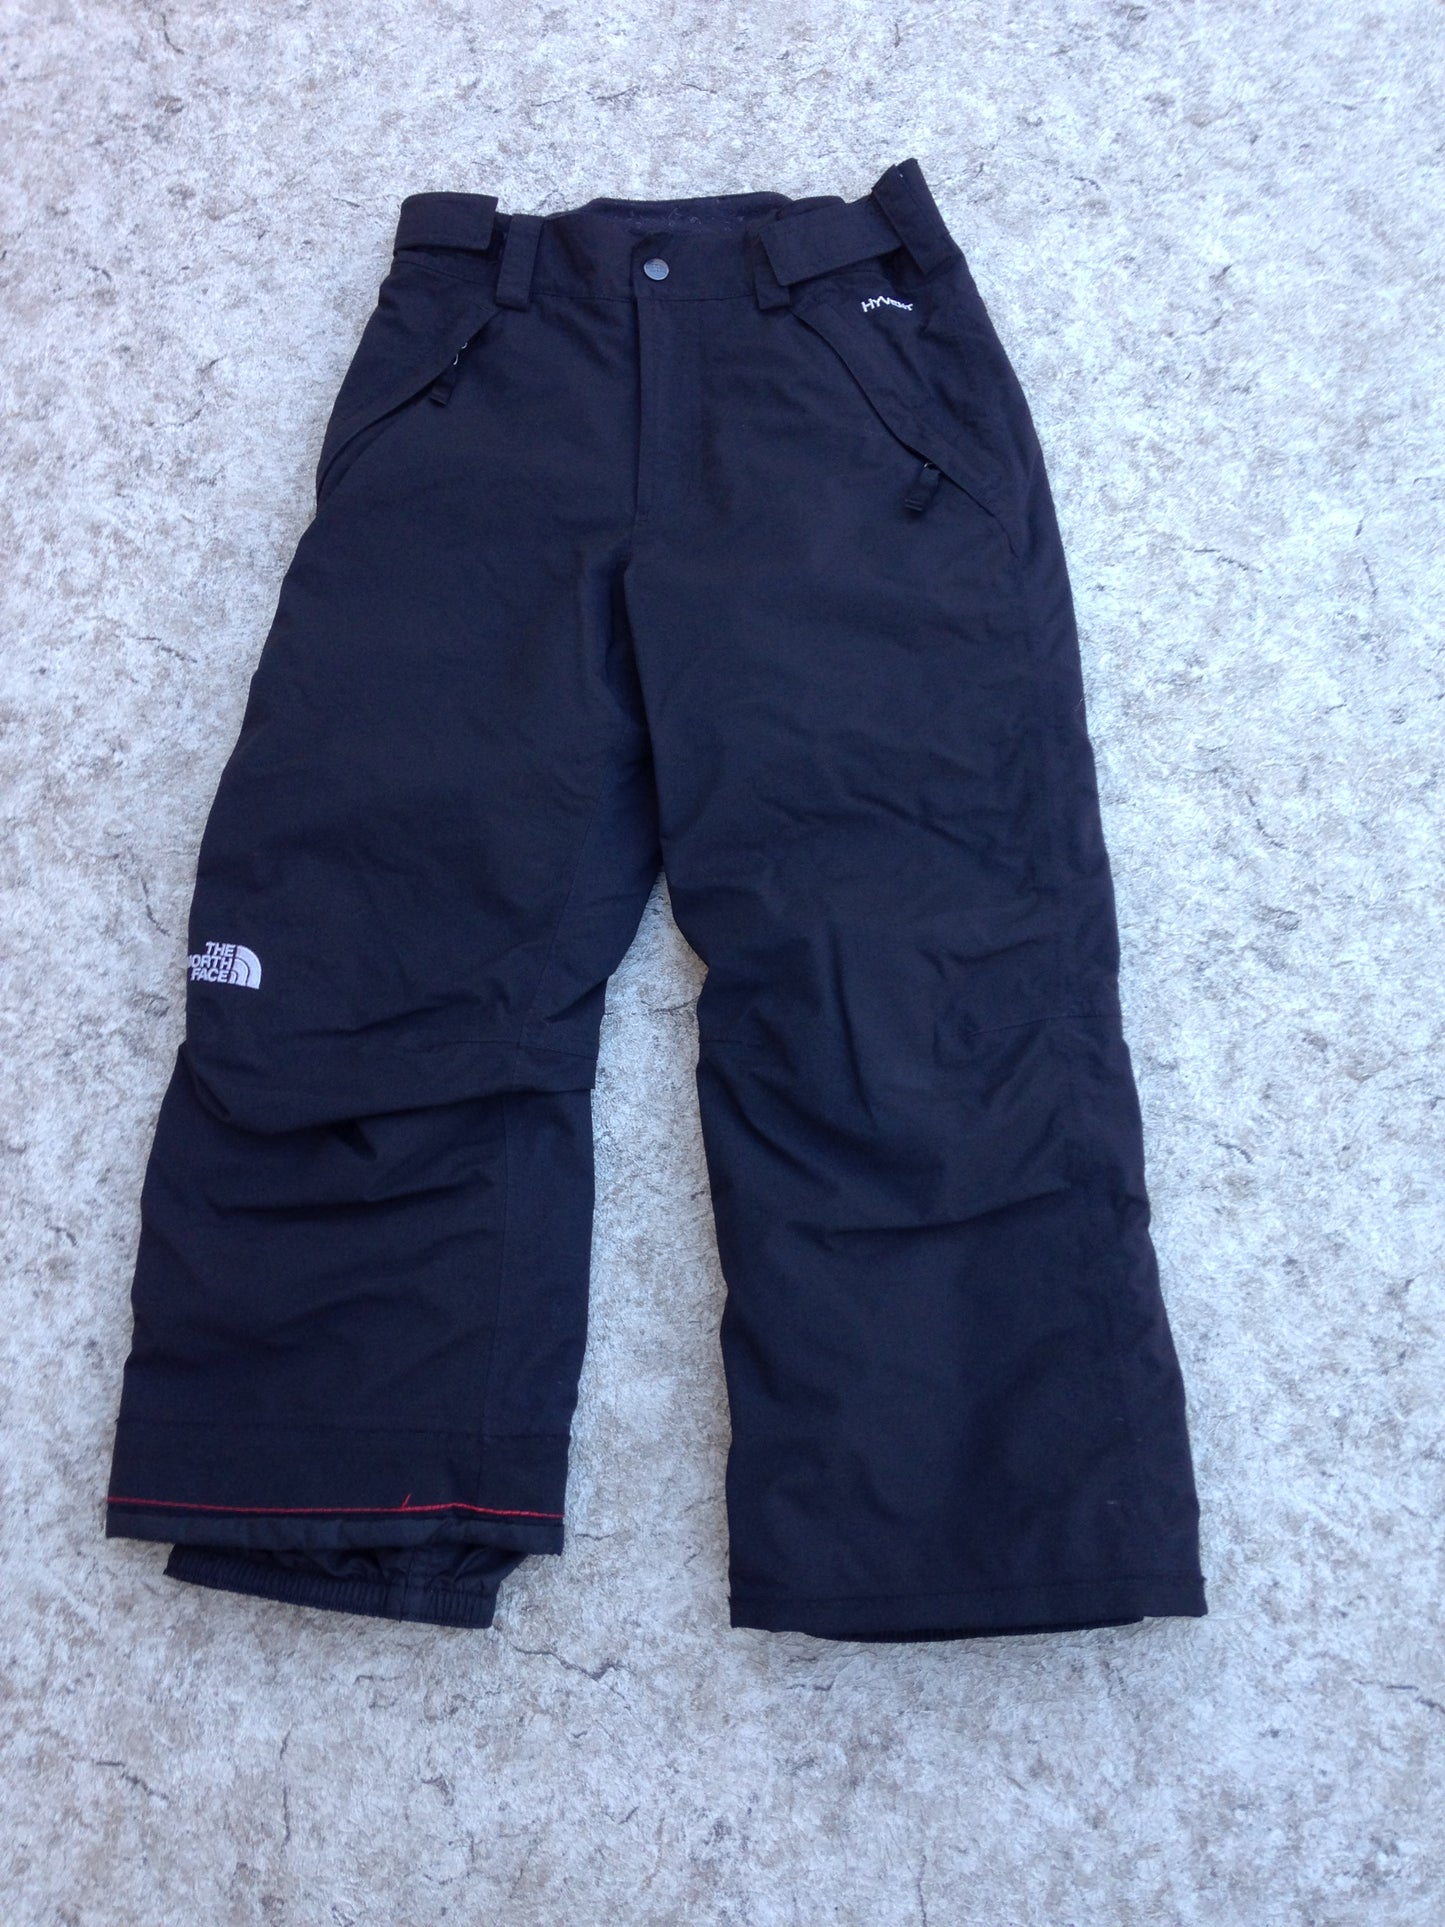 Snow Pants Child Size 10-12 The North Face Black Adjustable Waist Outstanding Quality Snowboarding